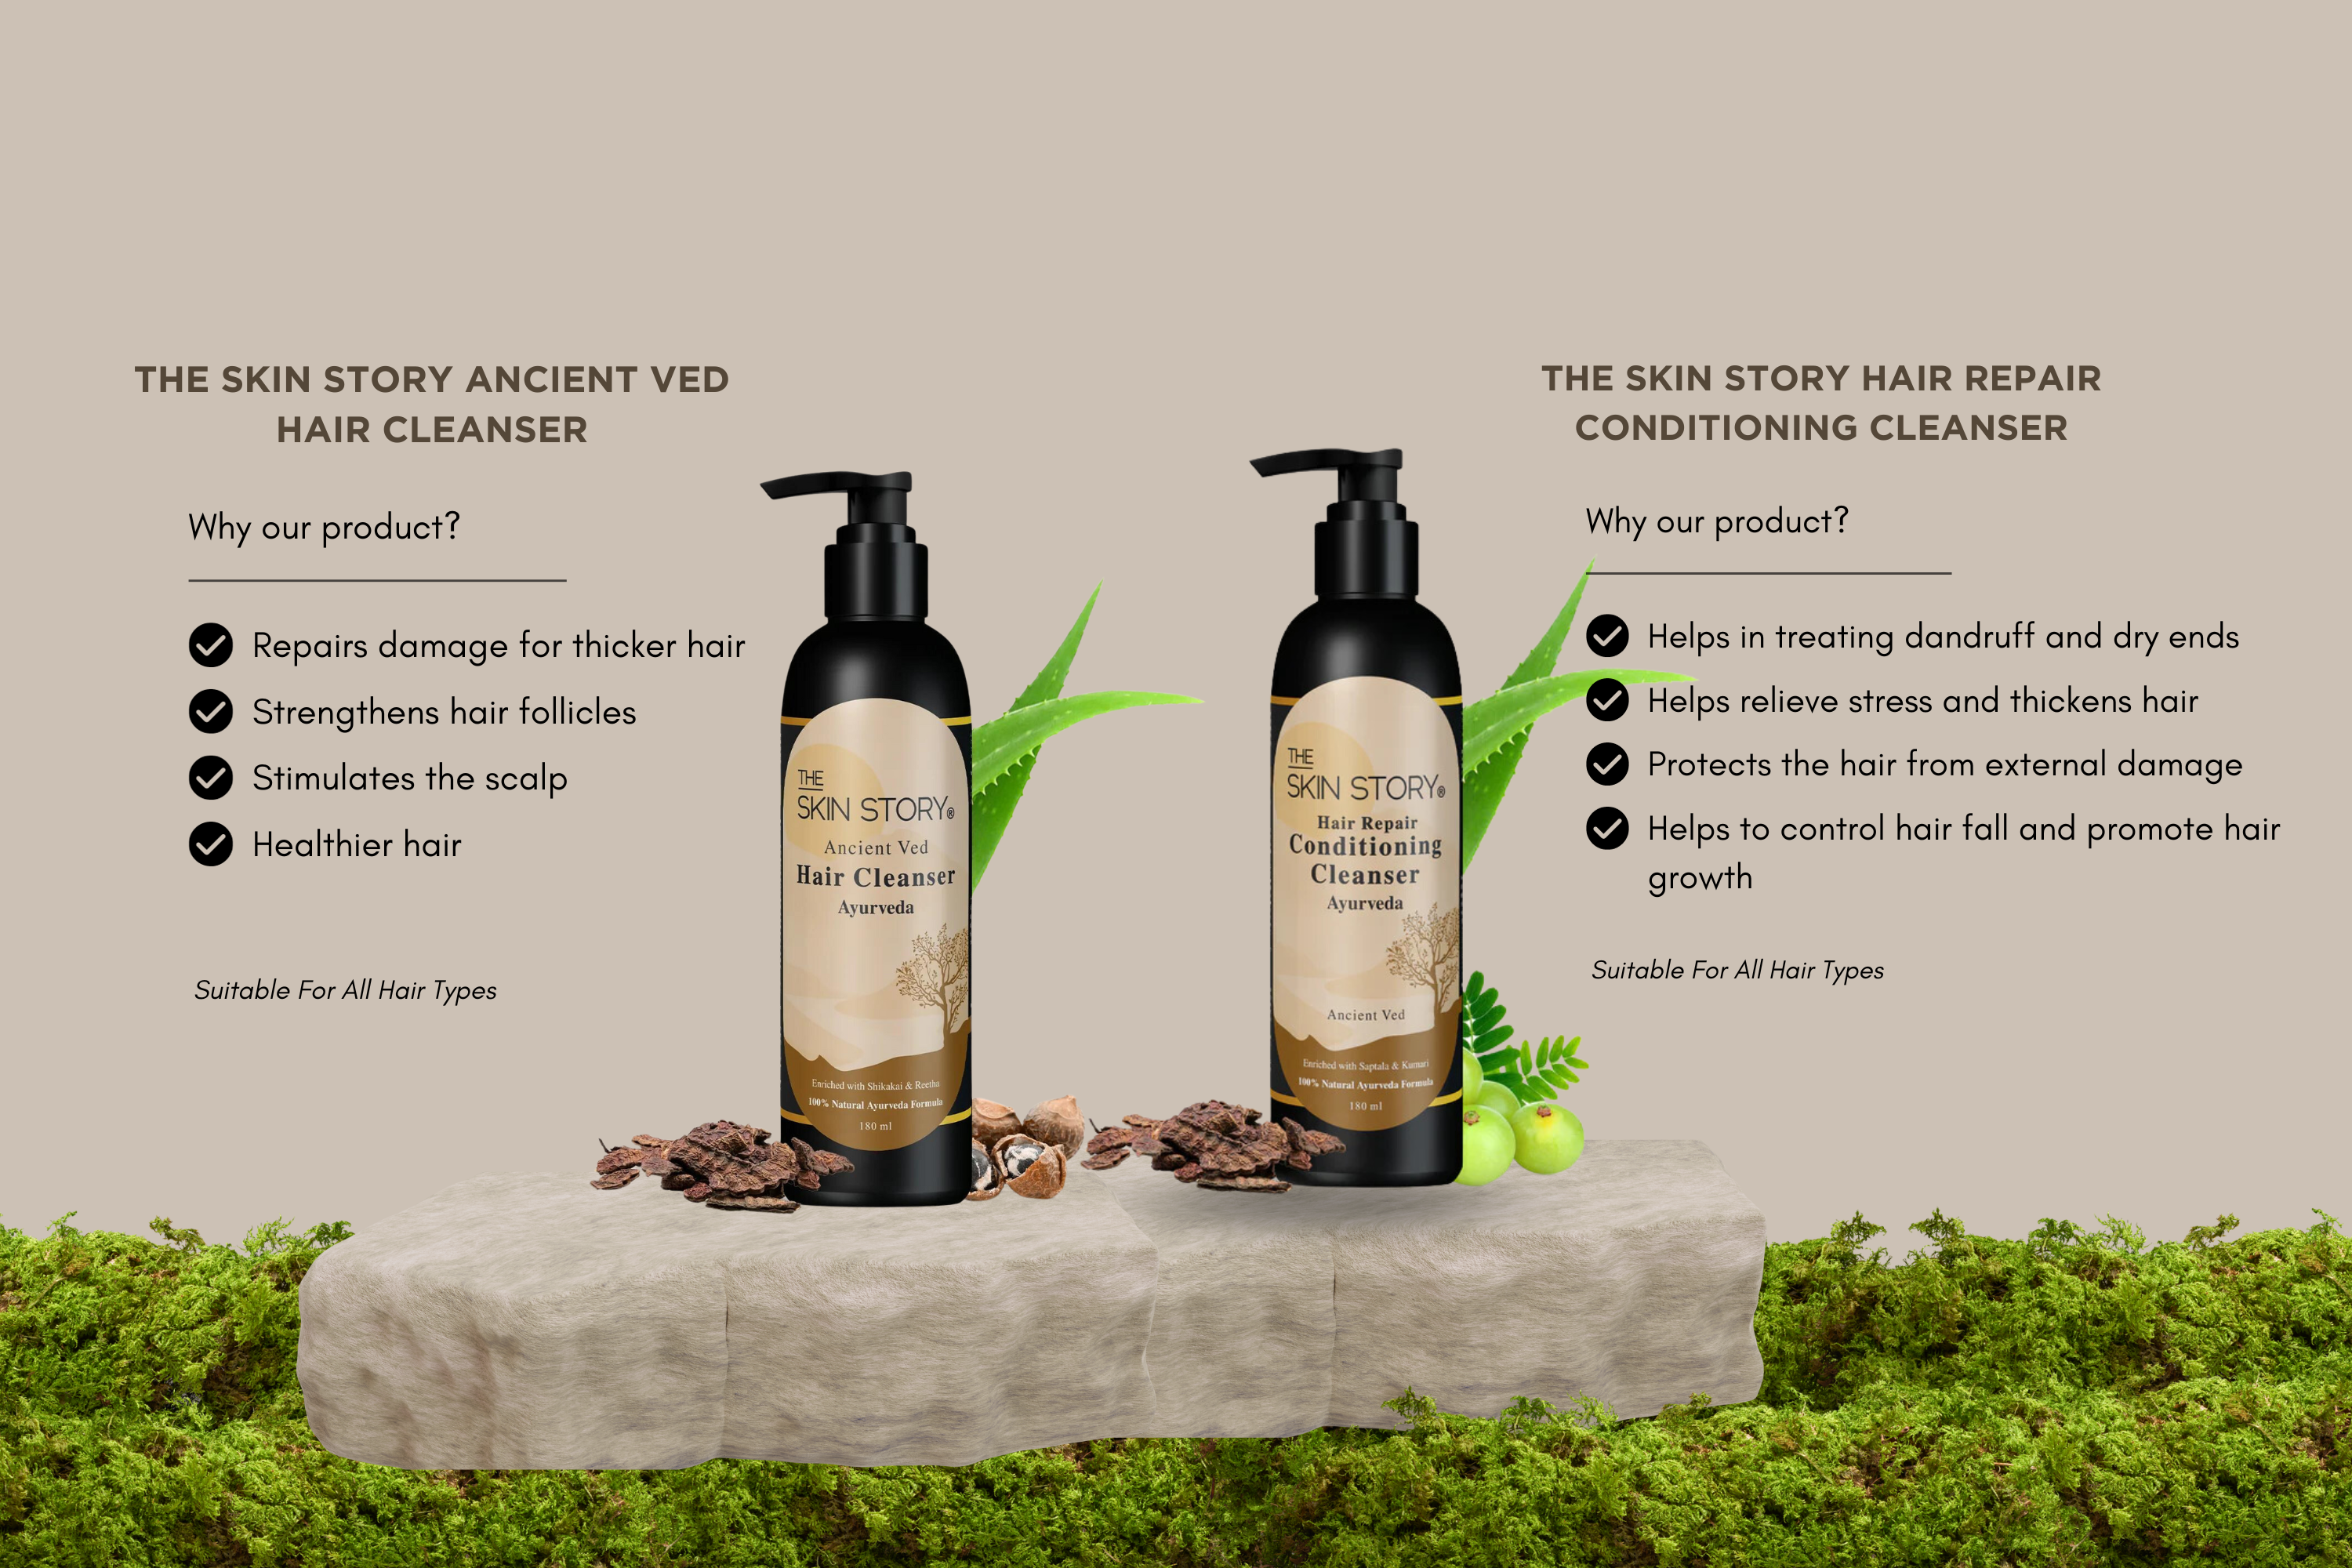 Rediscovering Ancient Hair Care Wisdom with Ancient Ved Hair Cleanser and Repair Conditioning Cleanser